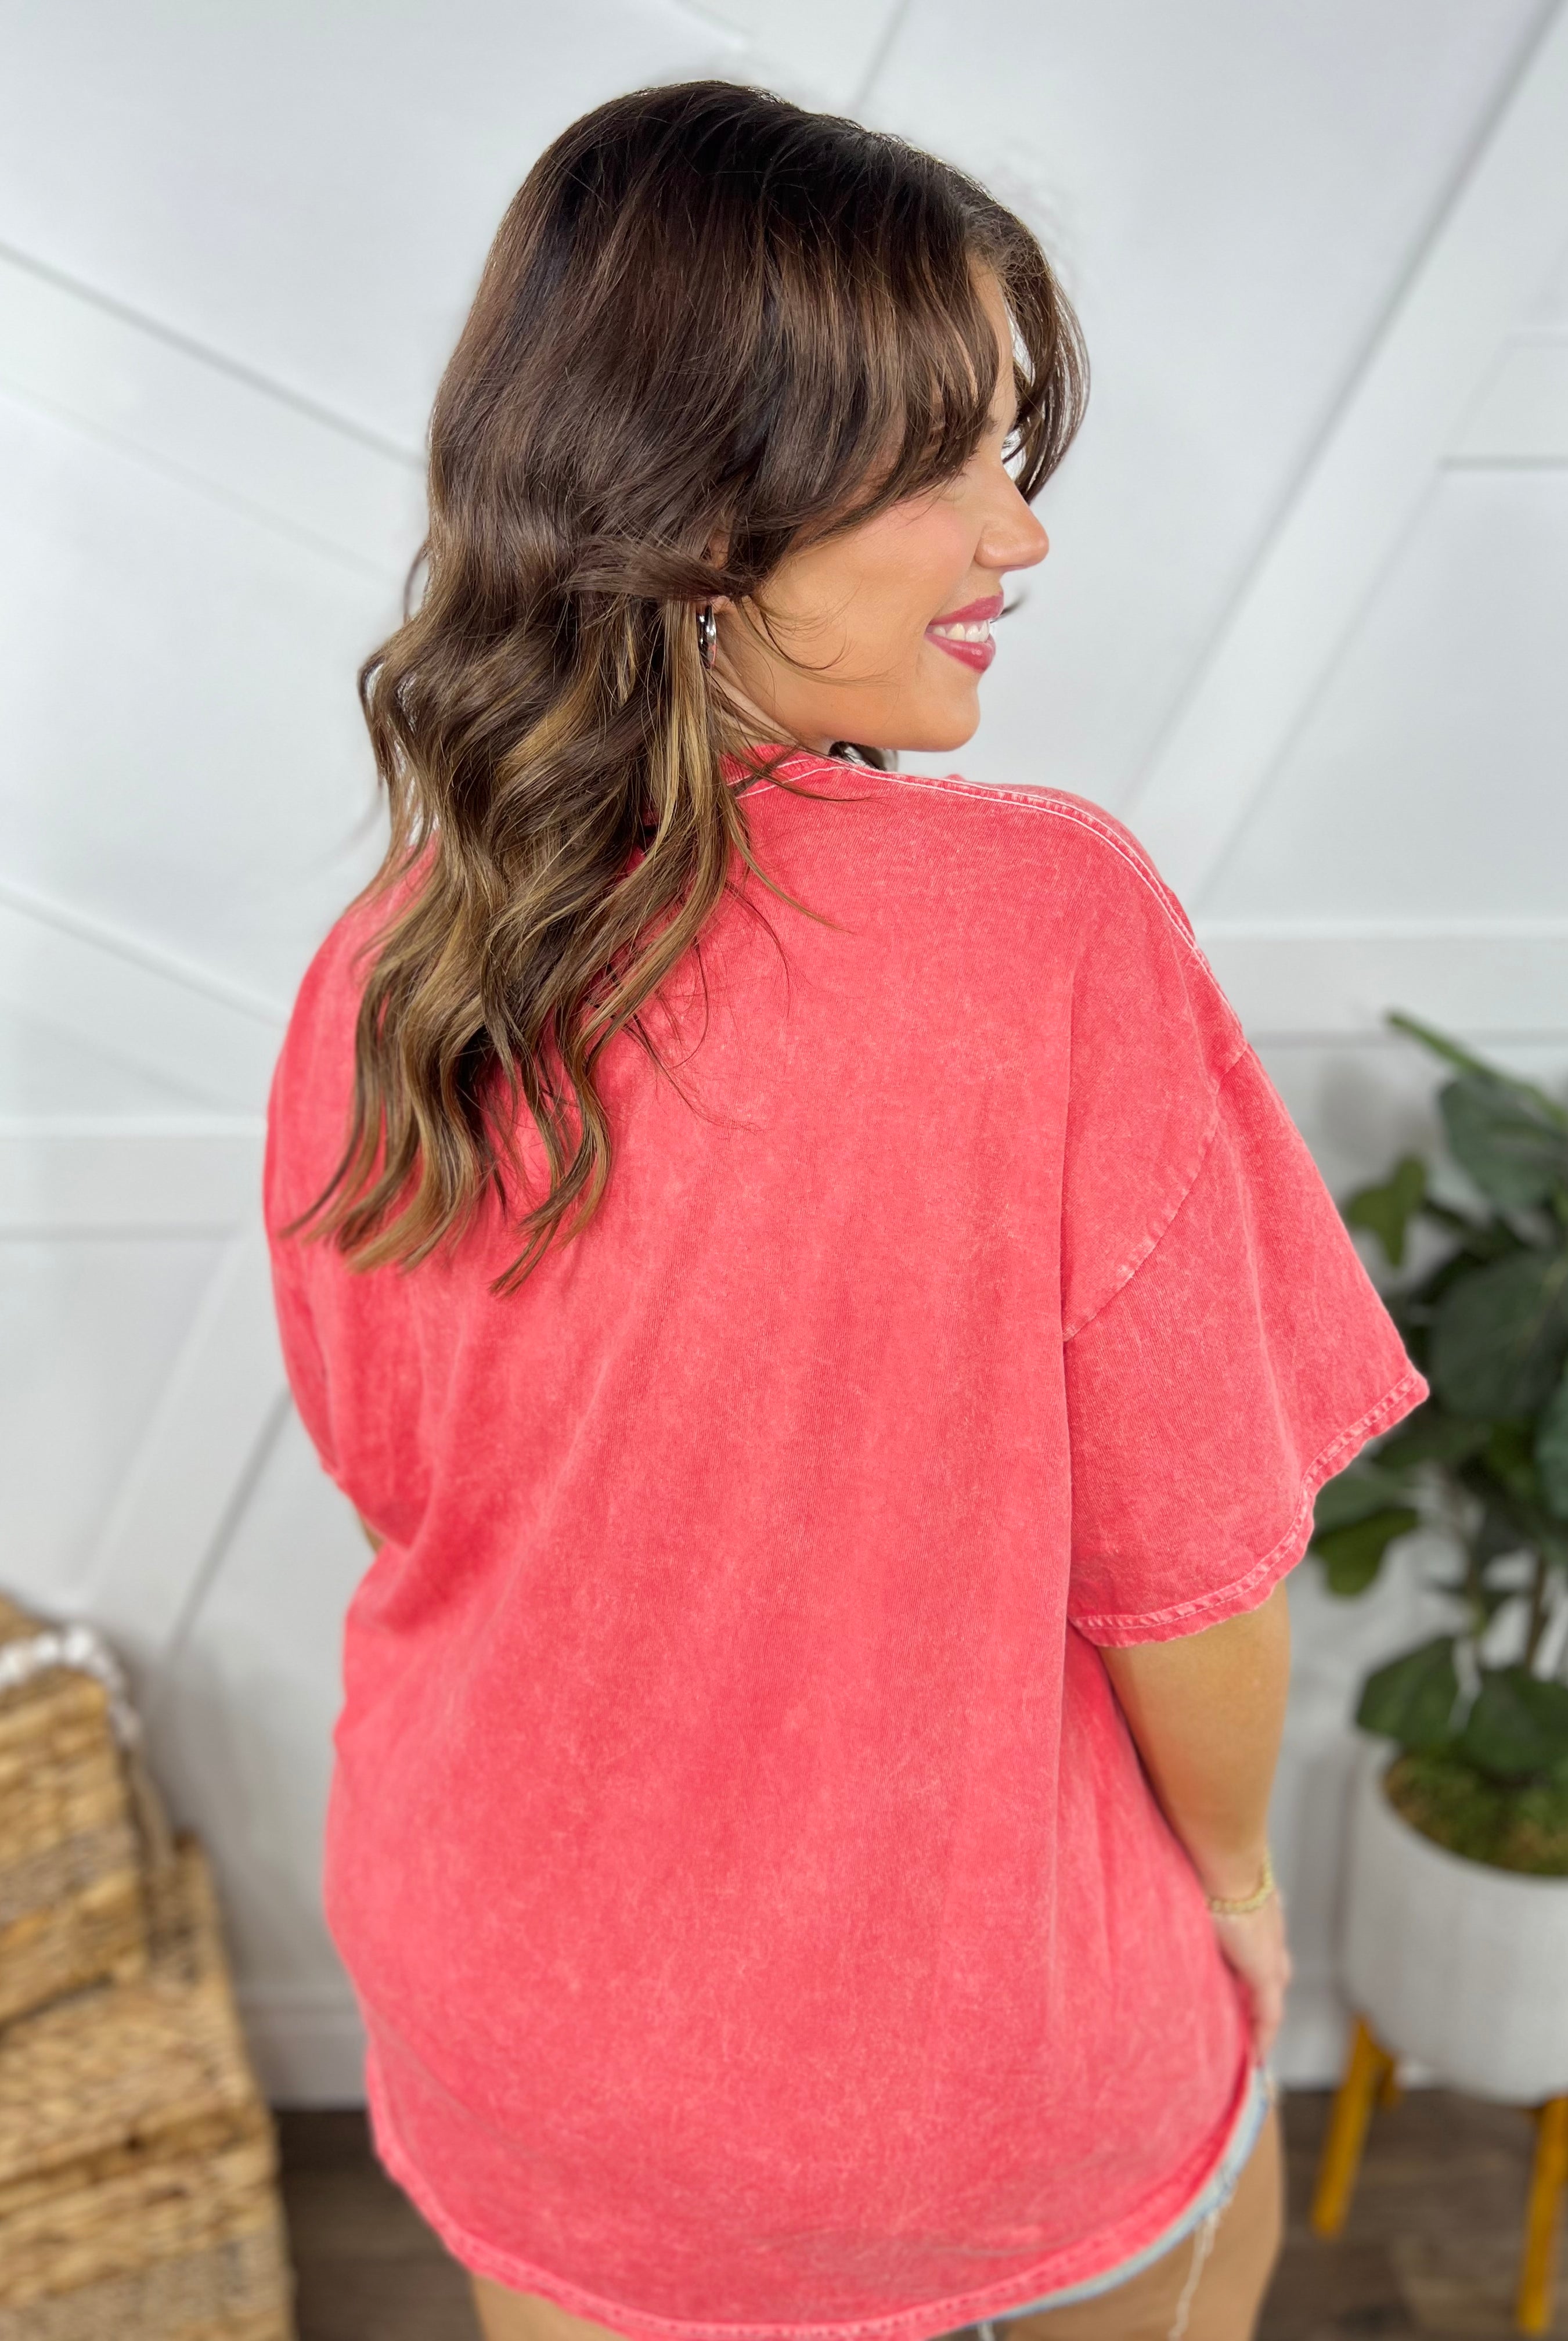 Mineral Chic Top-110 Short Sleeve Top-J. Her-Heathered Boho Boutique, Women's Fashion and Accessories in Palmetto, FL